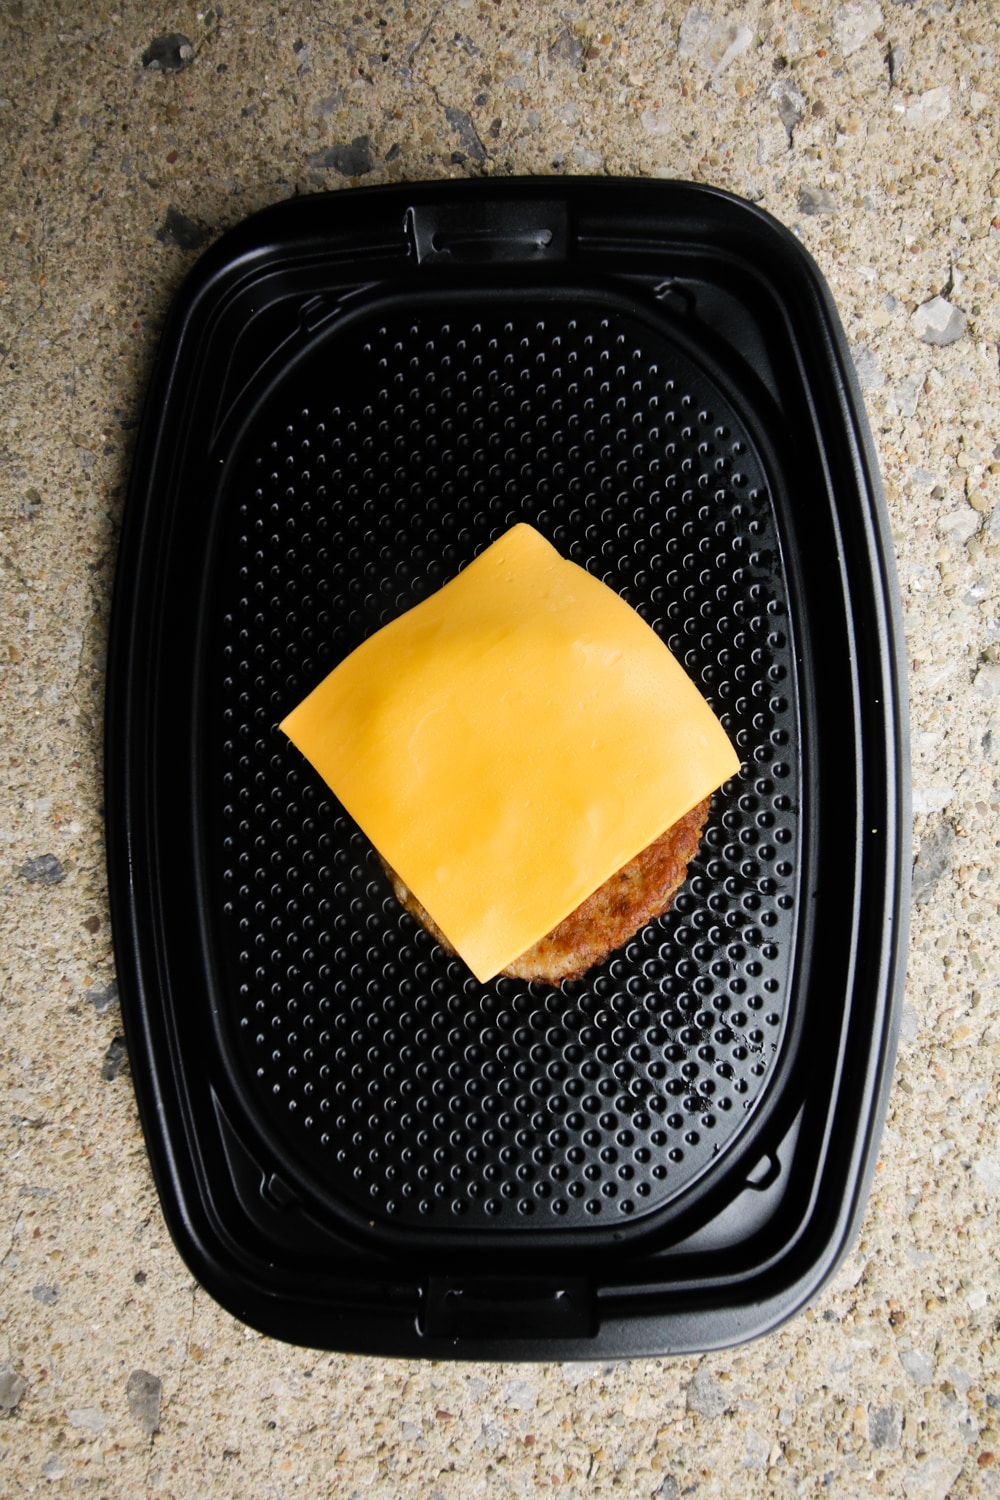 A piece of sausage topped with cheese on a black take-out container.